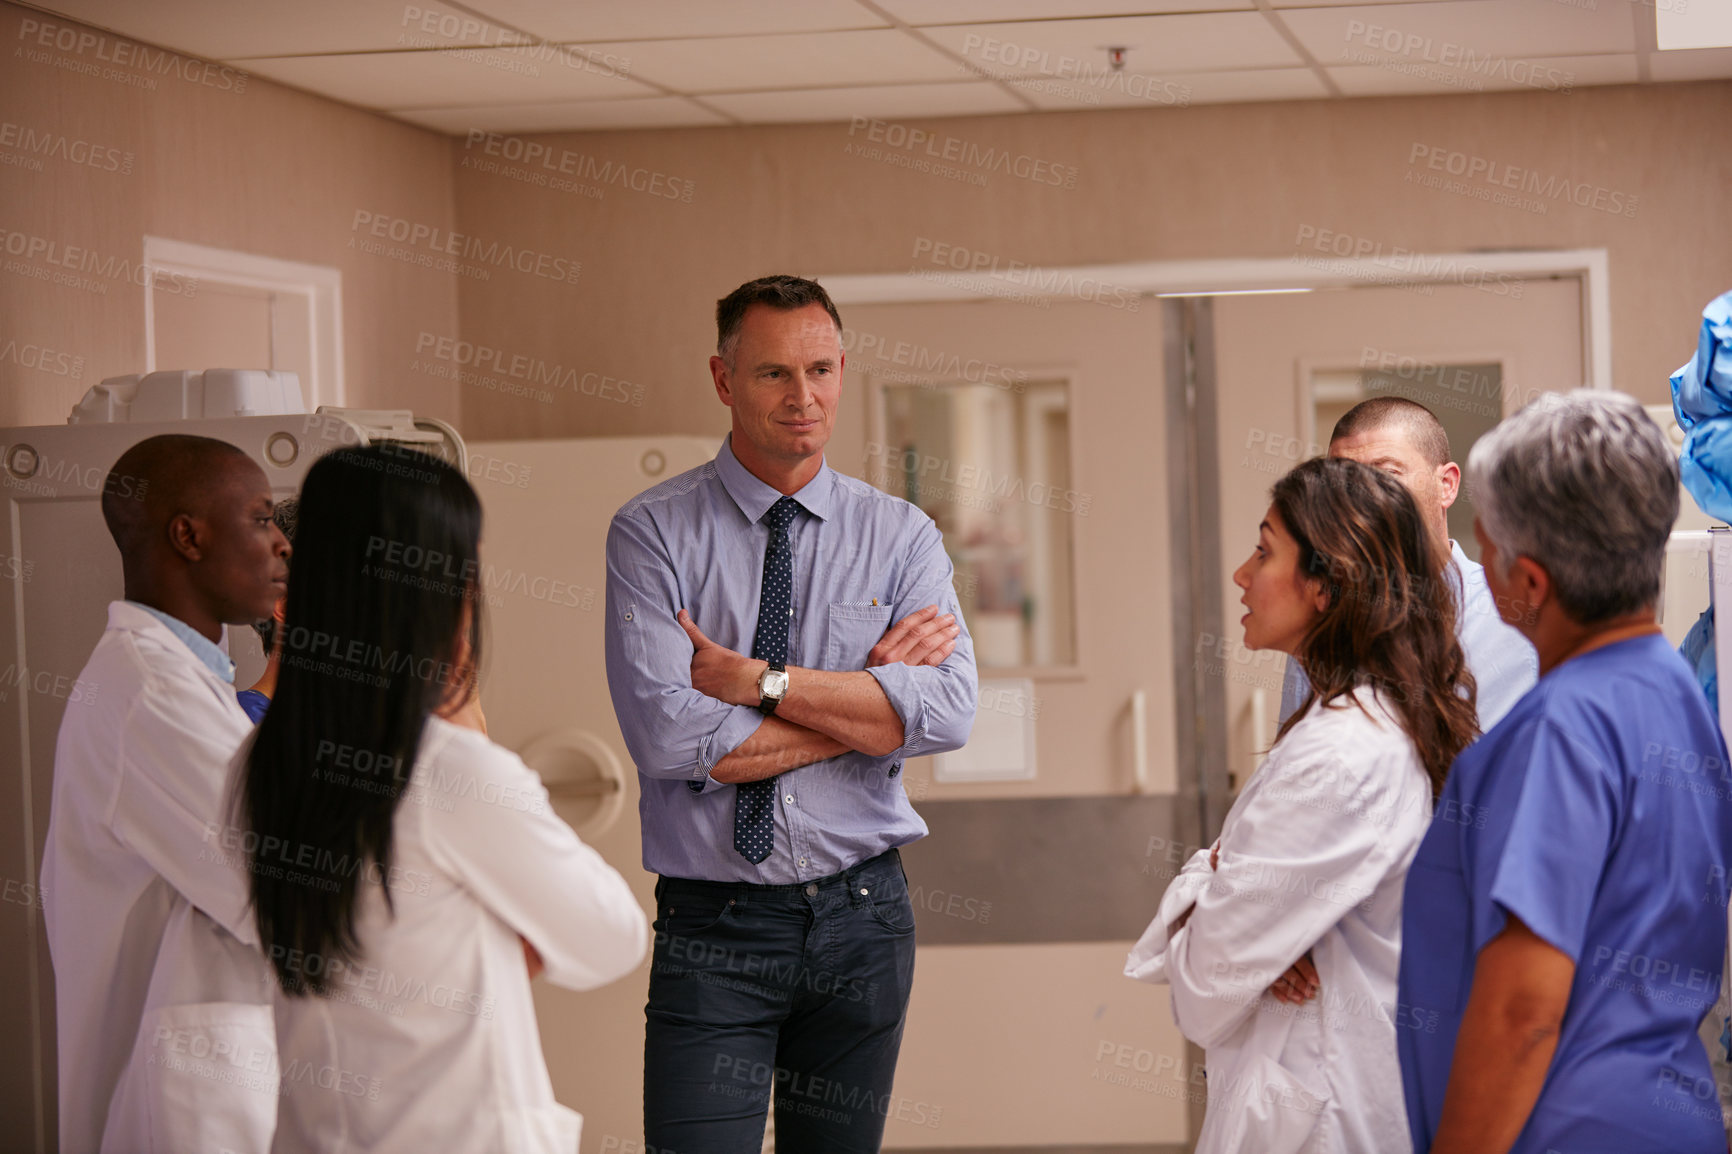 Buy stock photo Shot of a medical team having a discussion in a hospital